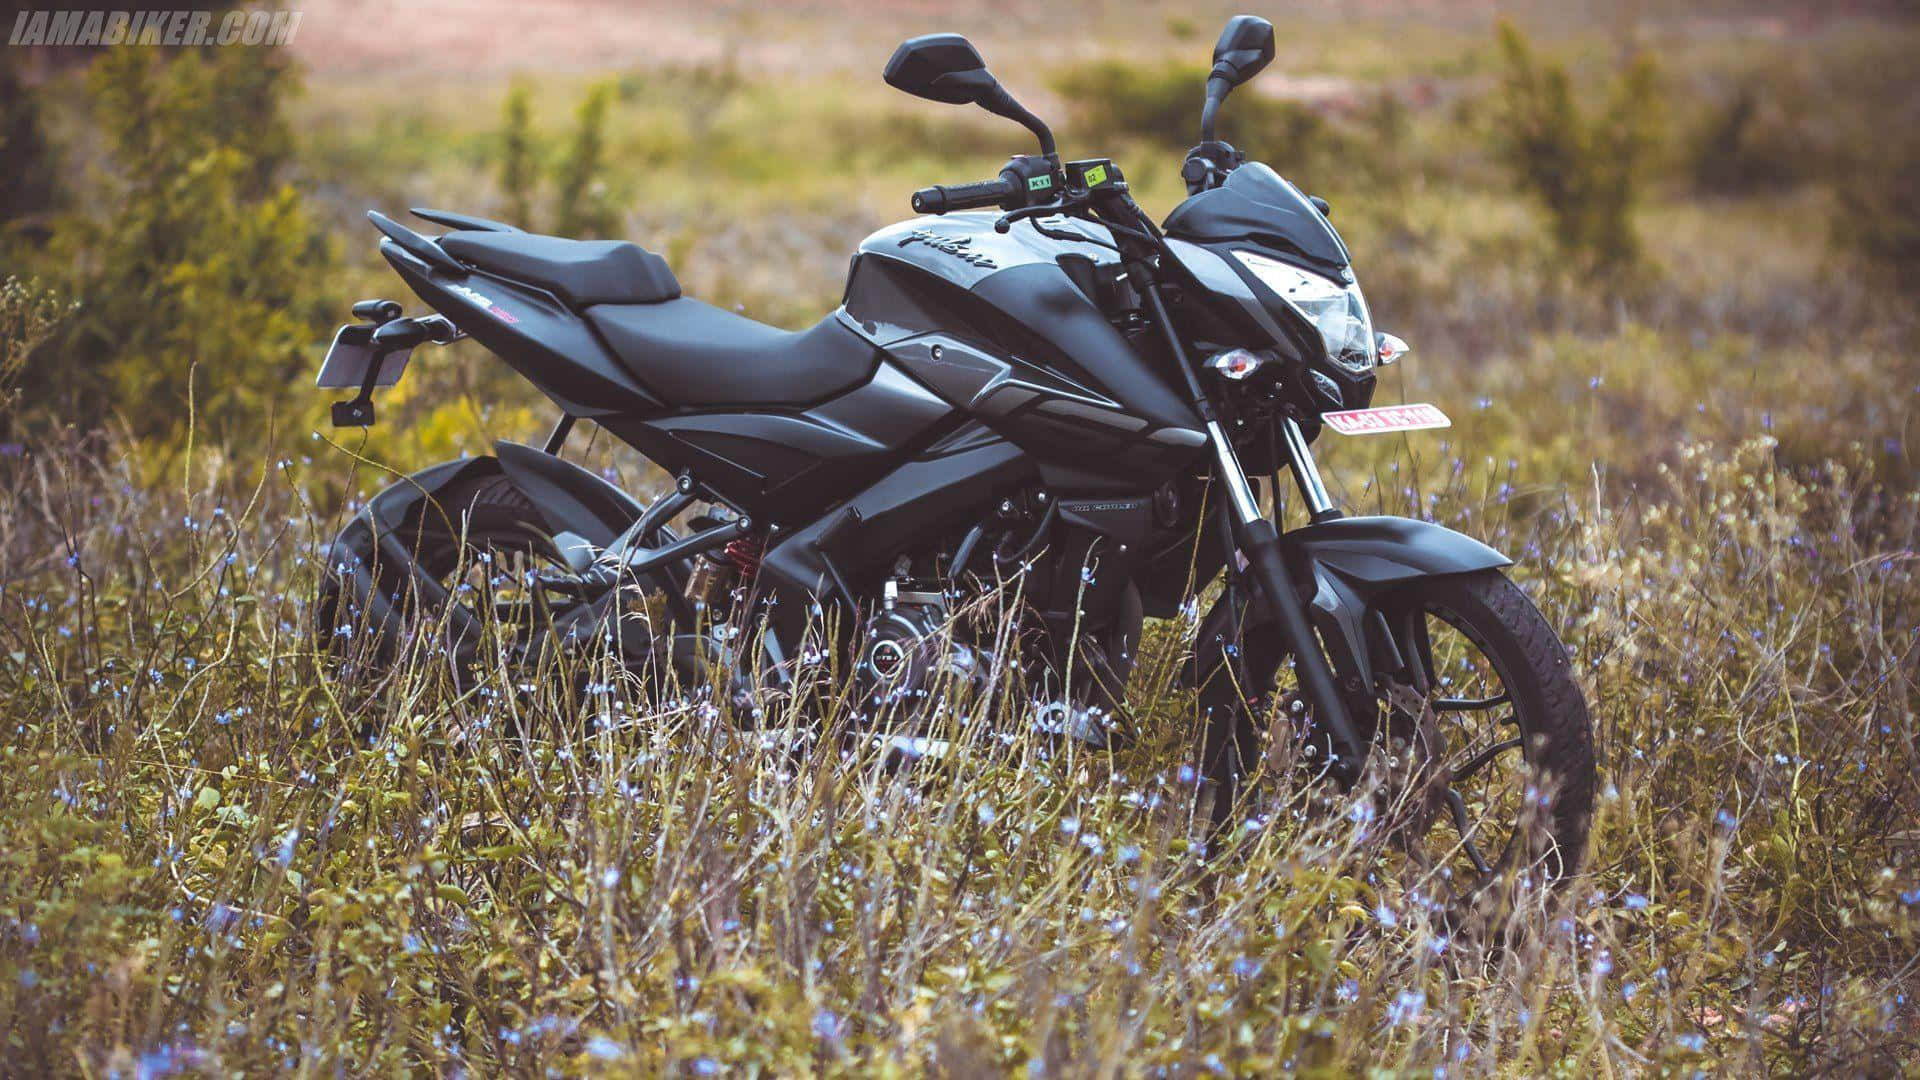 A Black Motorcycle Parked In A Field Of Tall Grass